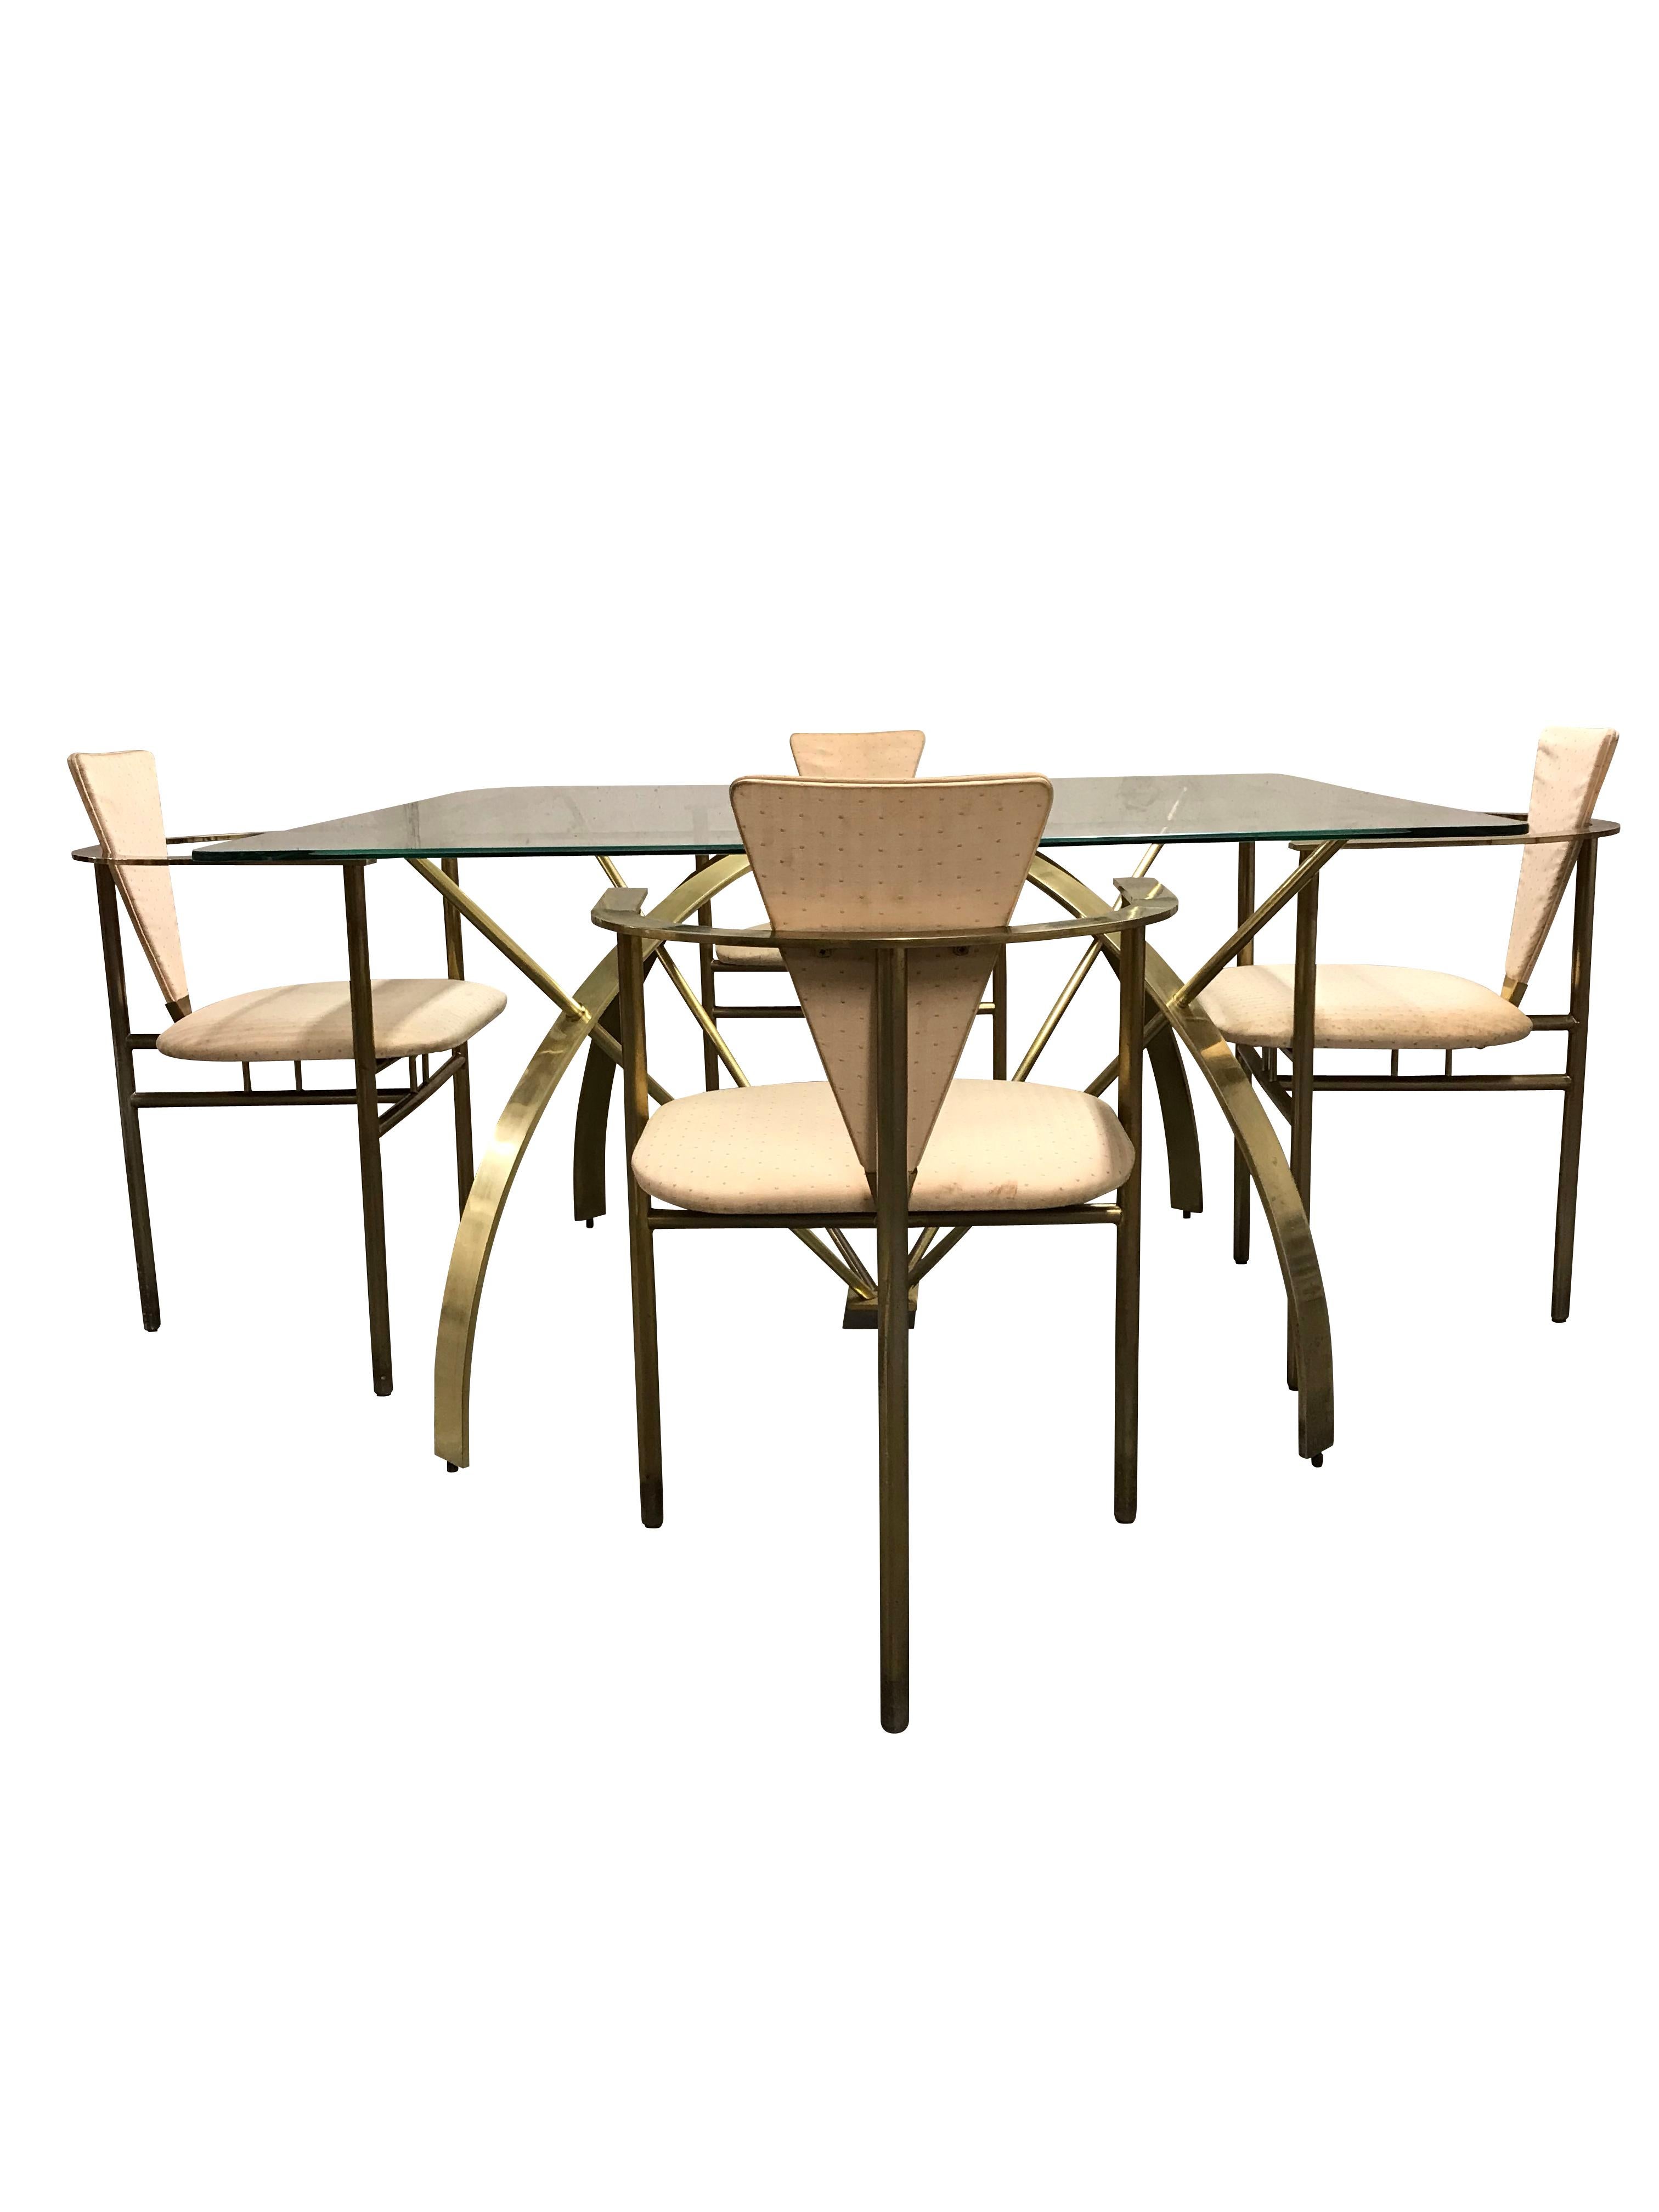 Rare brass dining table with a square, partially frozen, glass top.

The set has in fact six chairs but the glass accommodates only four, the glass can be change if desired.

The atomic-like design of the table combined with the tripod chairs